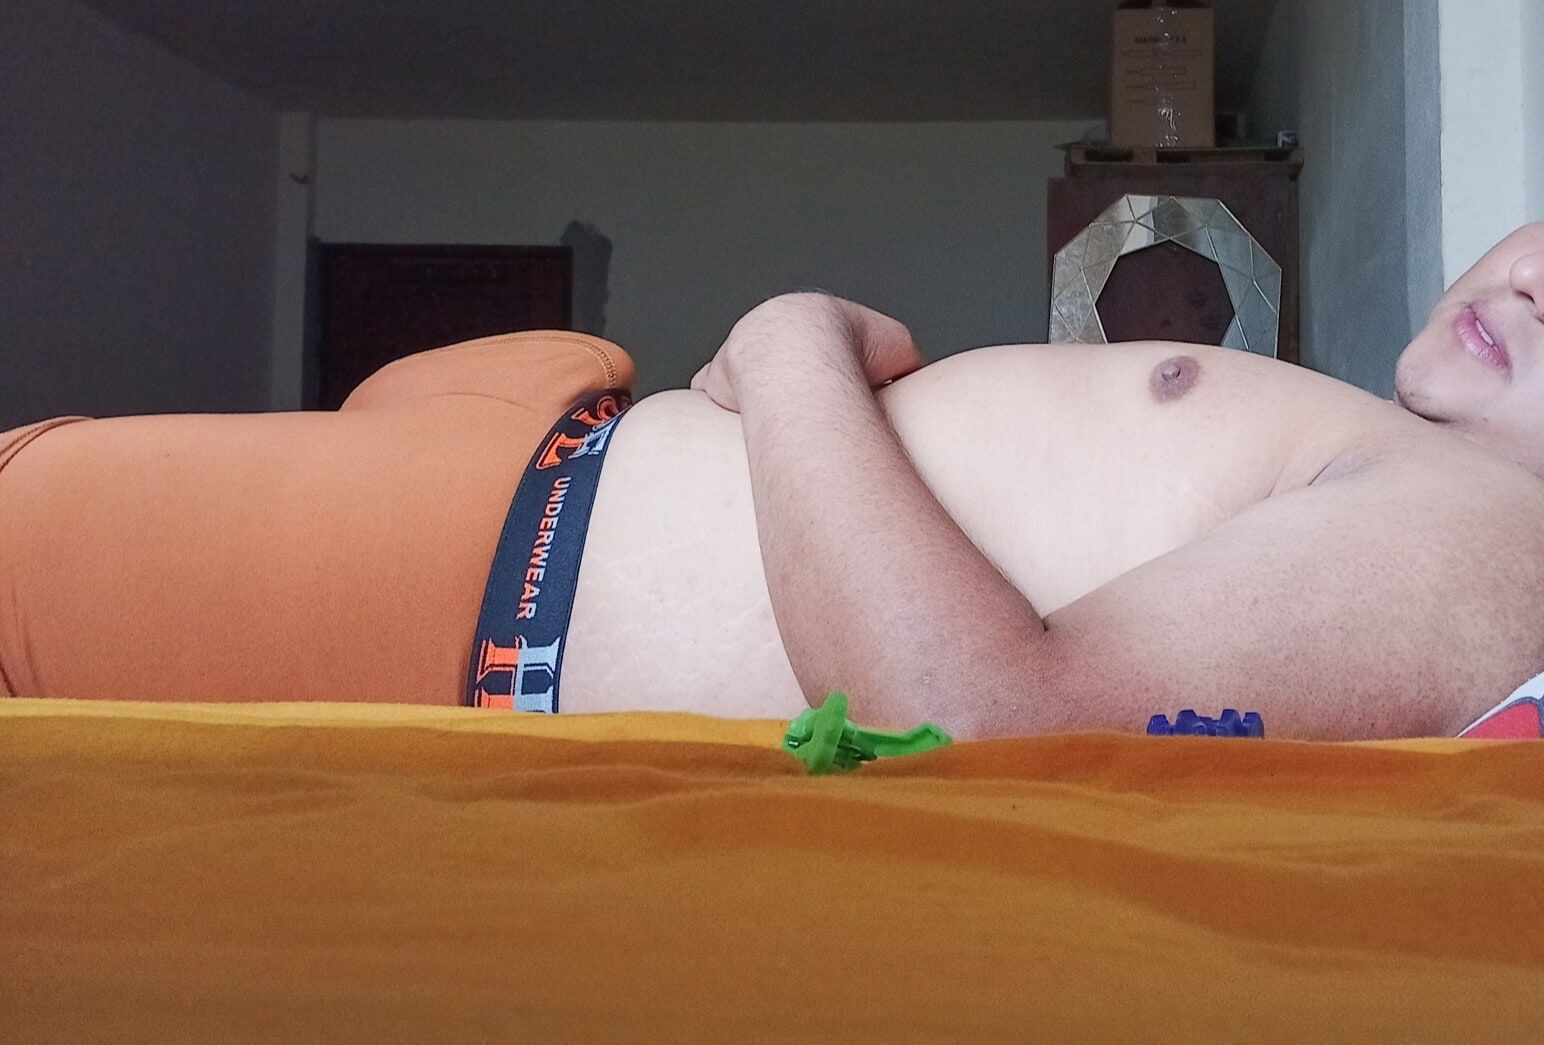 Me Lying Down and my Penis Standing - 01 (In Underwear) #14